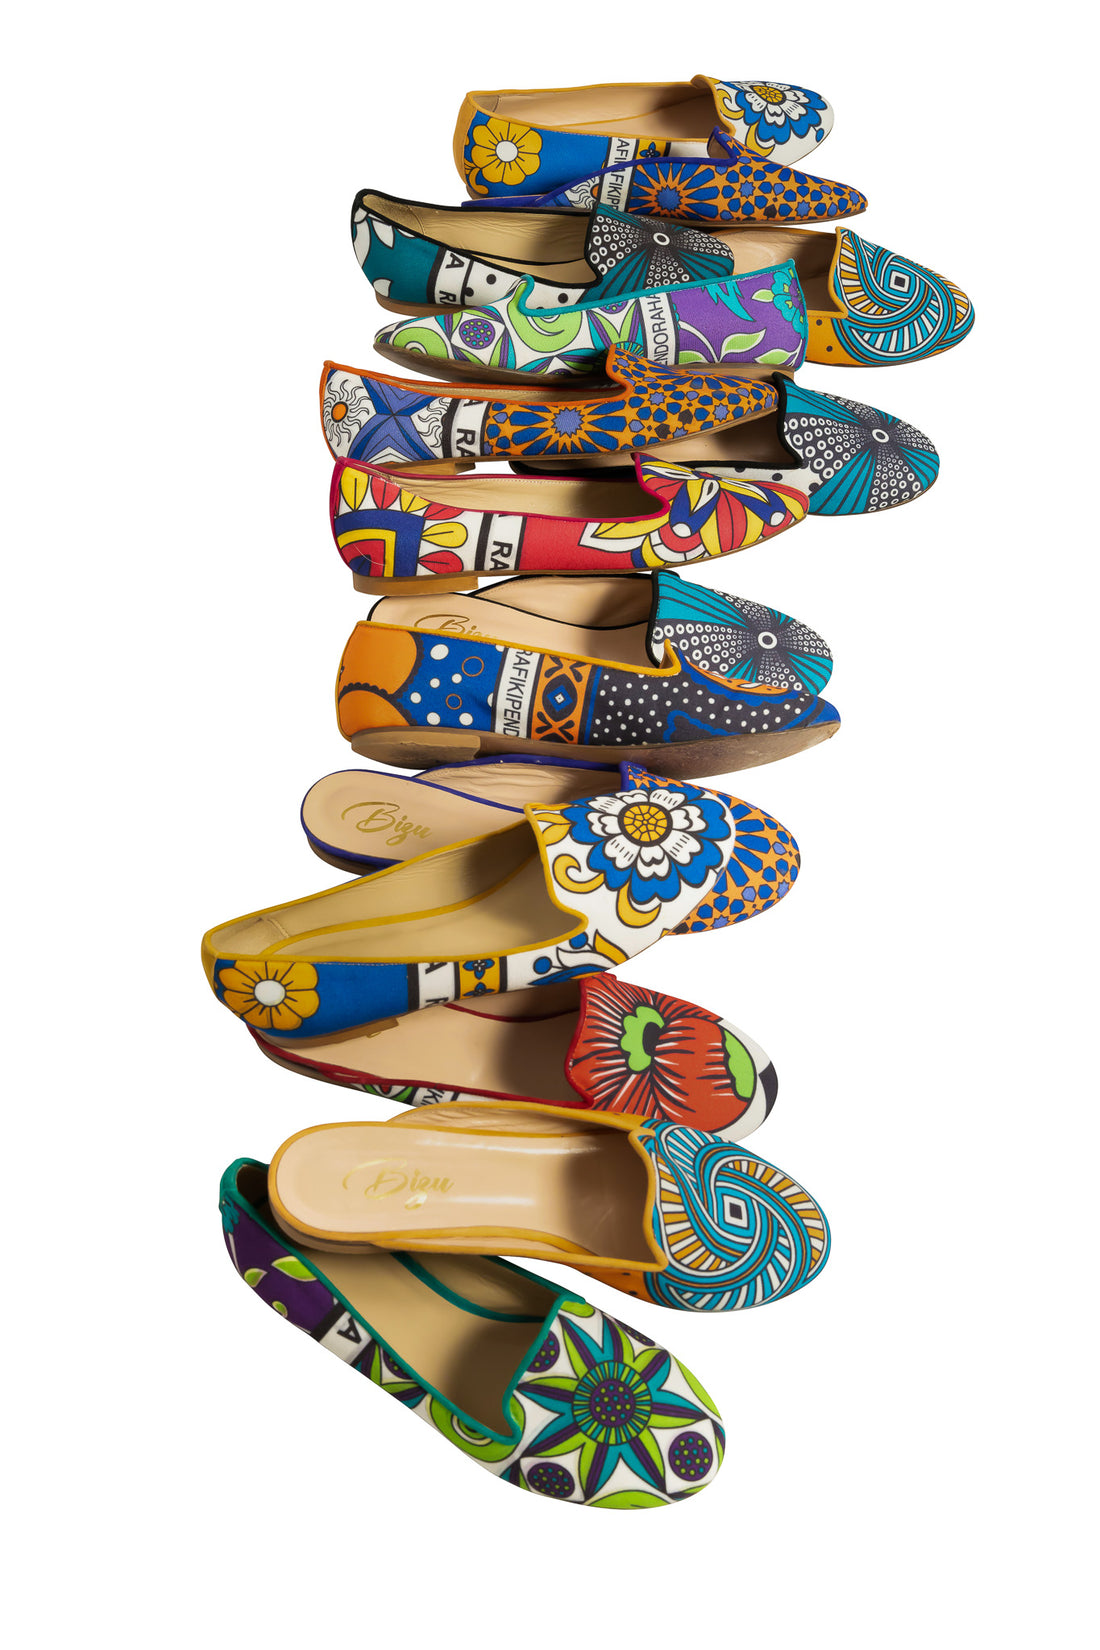 Bizu Shoes: The Hermes Scarf for Your Feet - A Colorful, Limited Edition Italian Delight